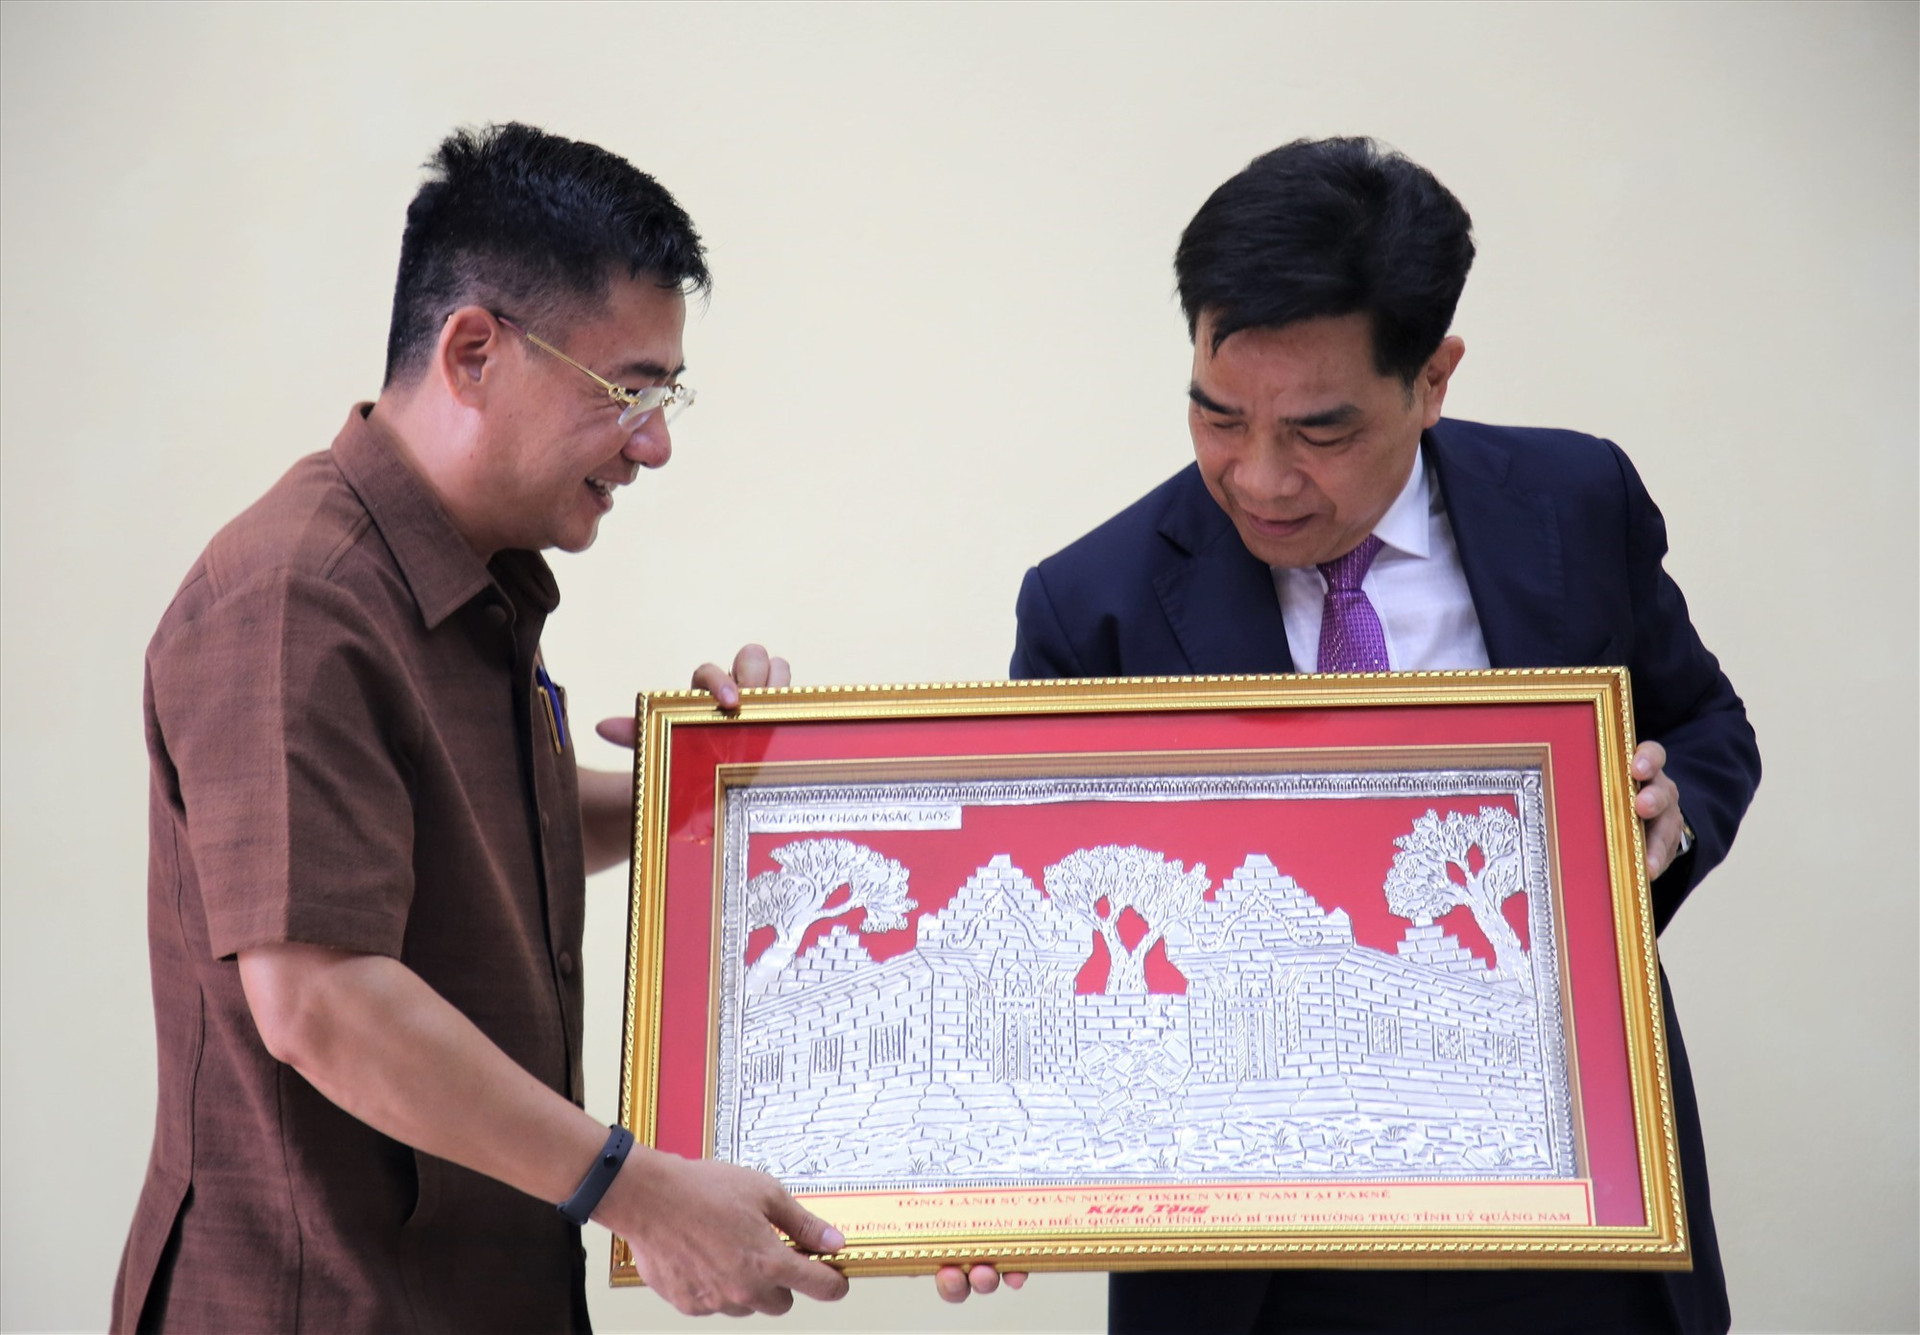 Mr. Dung offers a gift to Mr. Trung